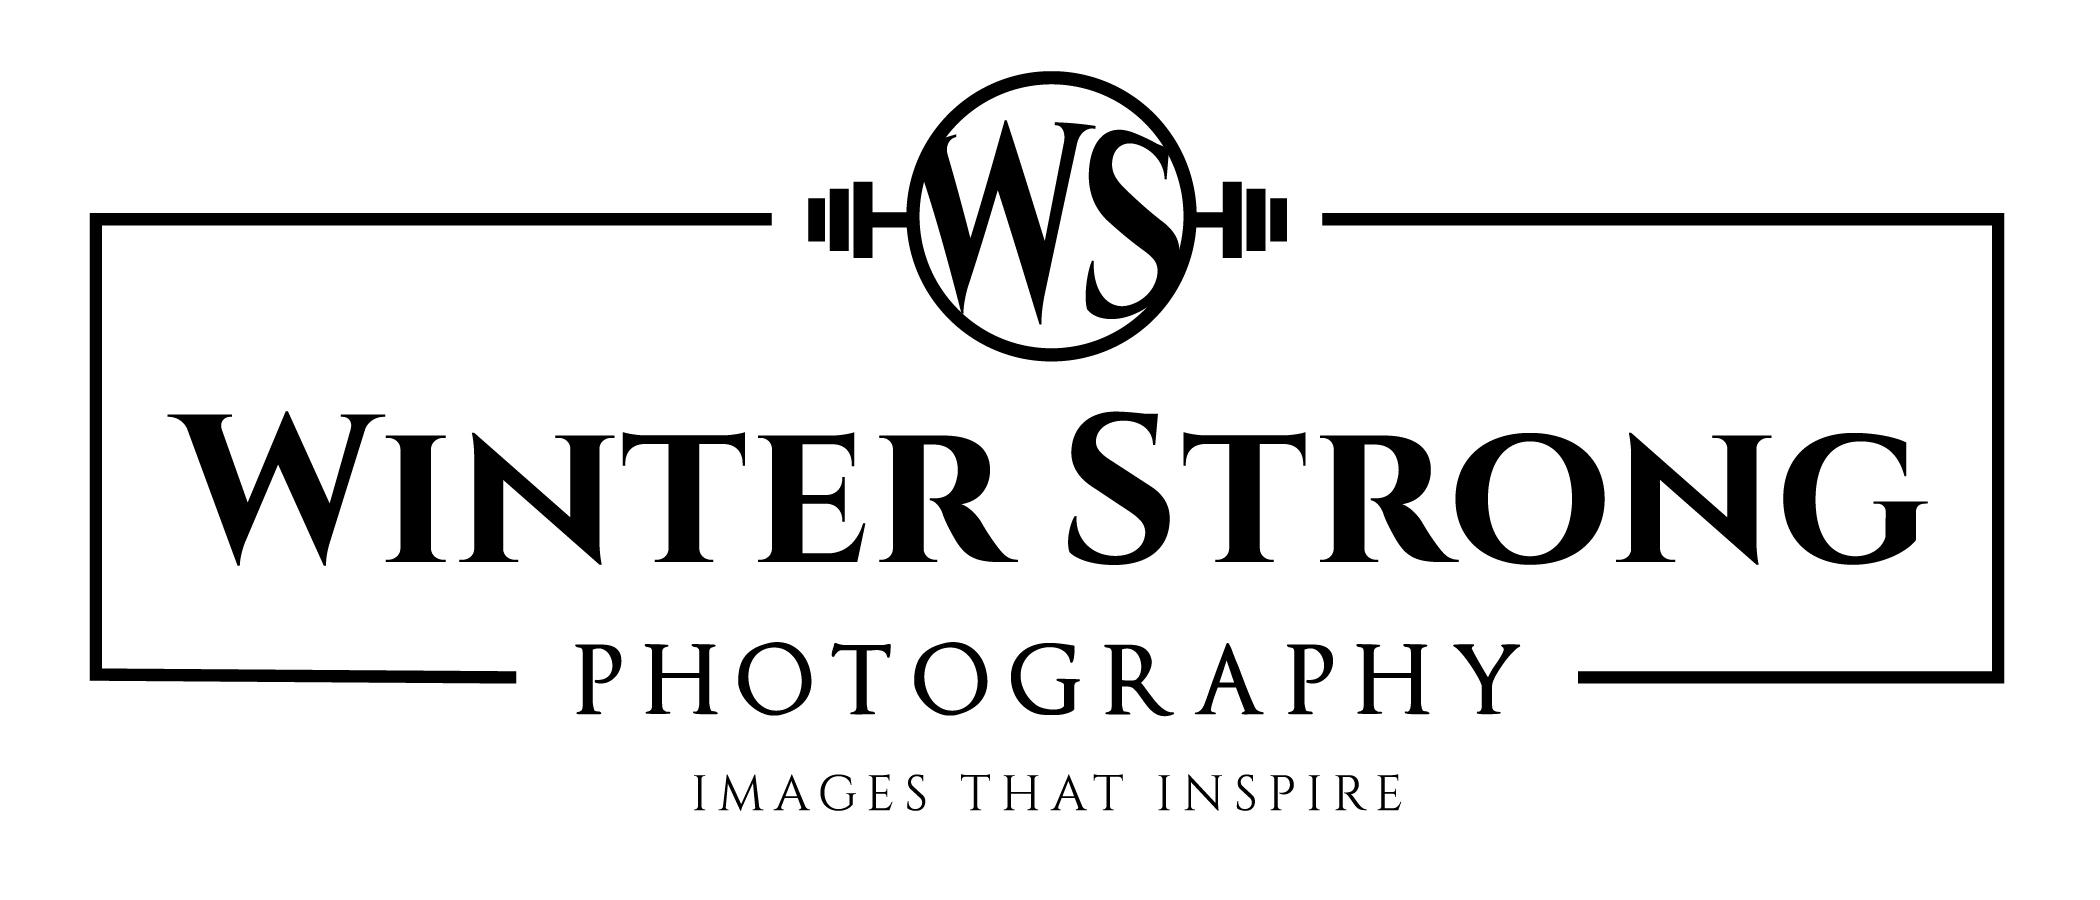 WinterStrong Photography